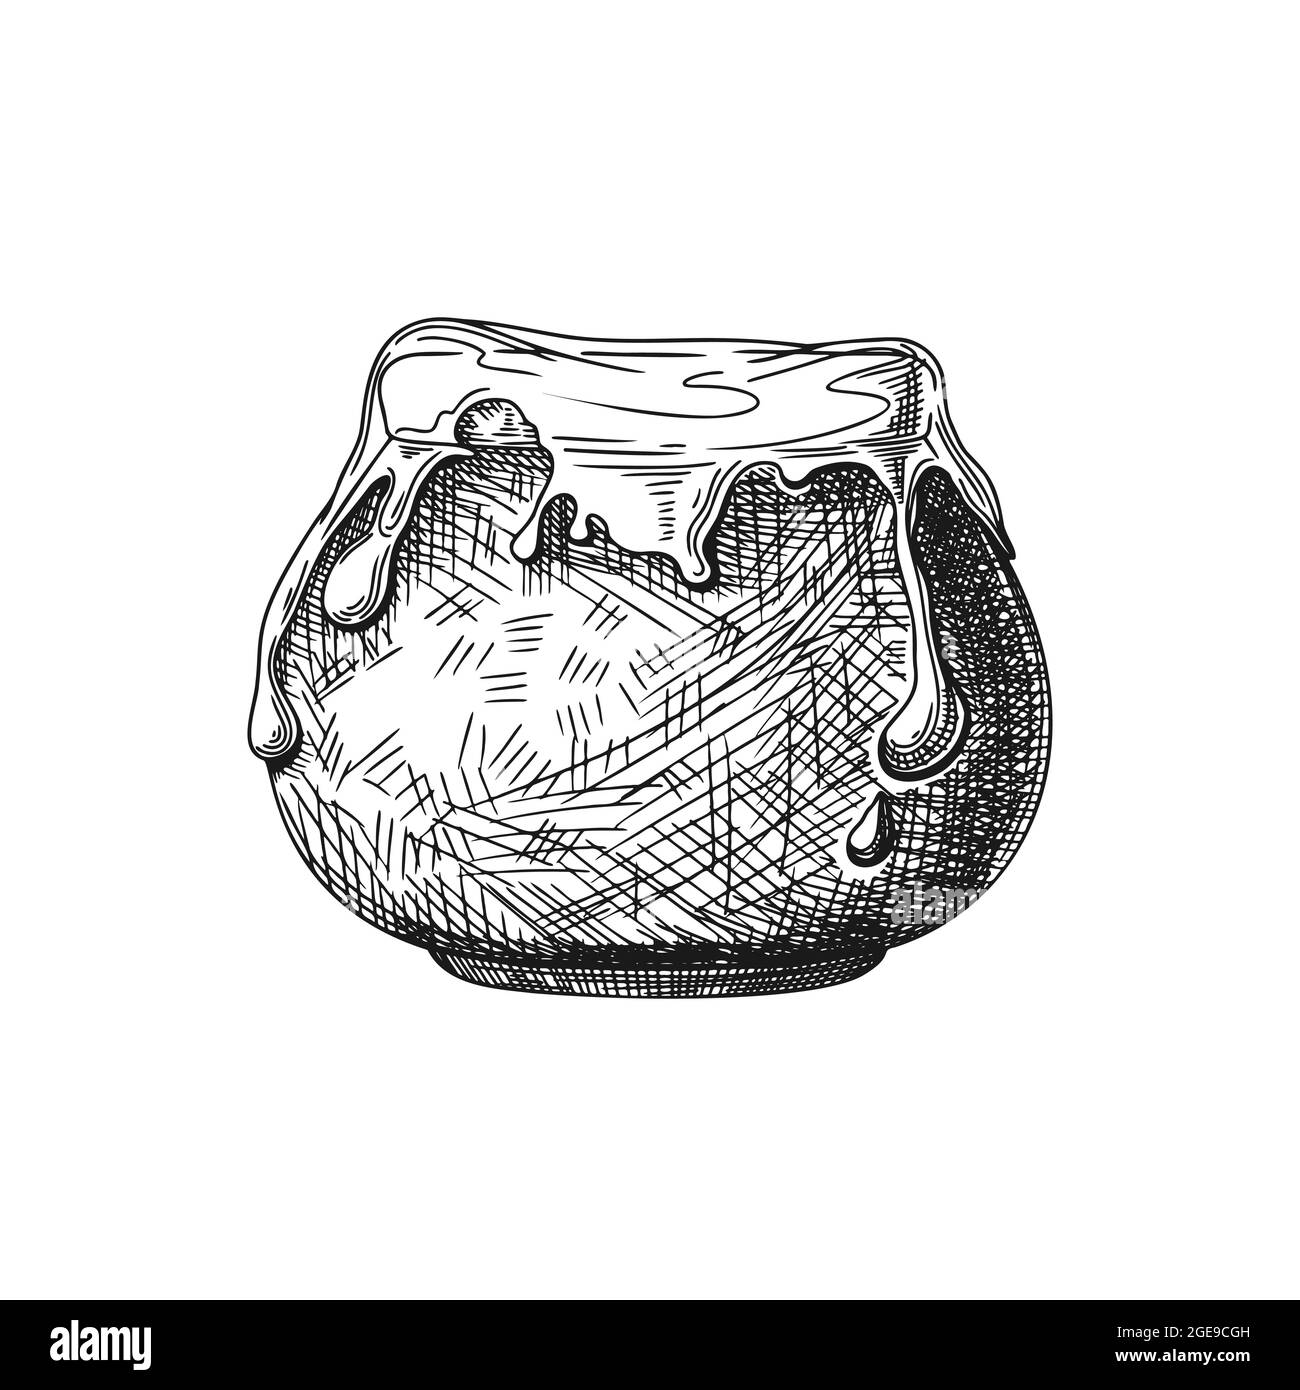 Sketch of a pot from which honey flows. Vector illustration Stock Vector